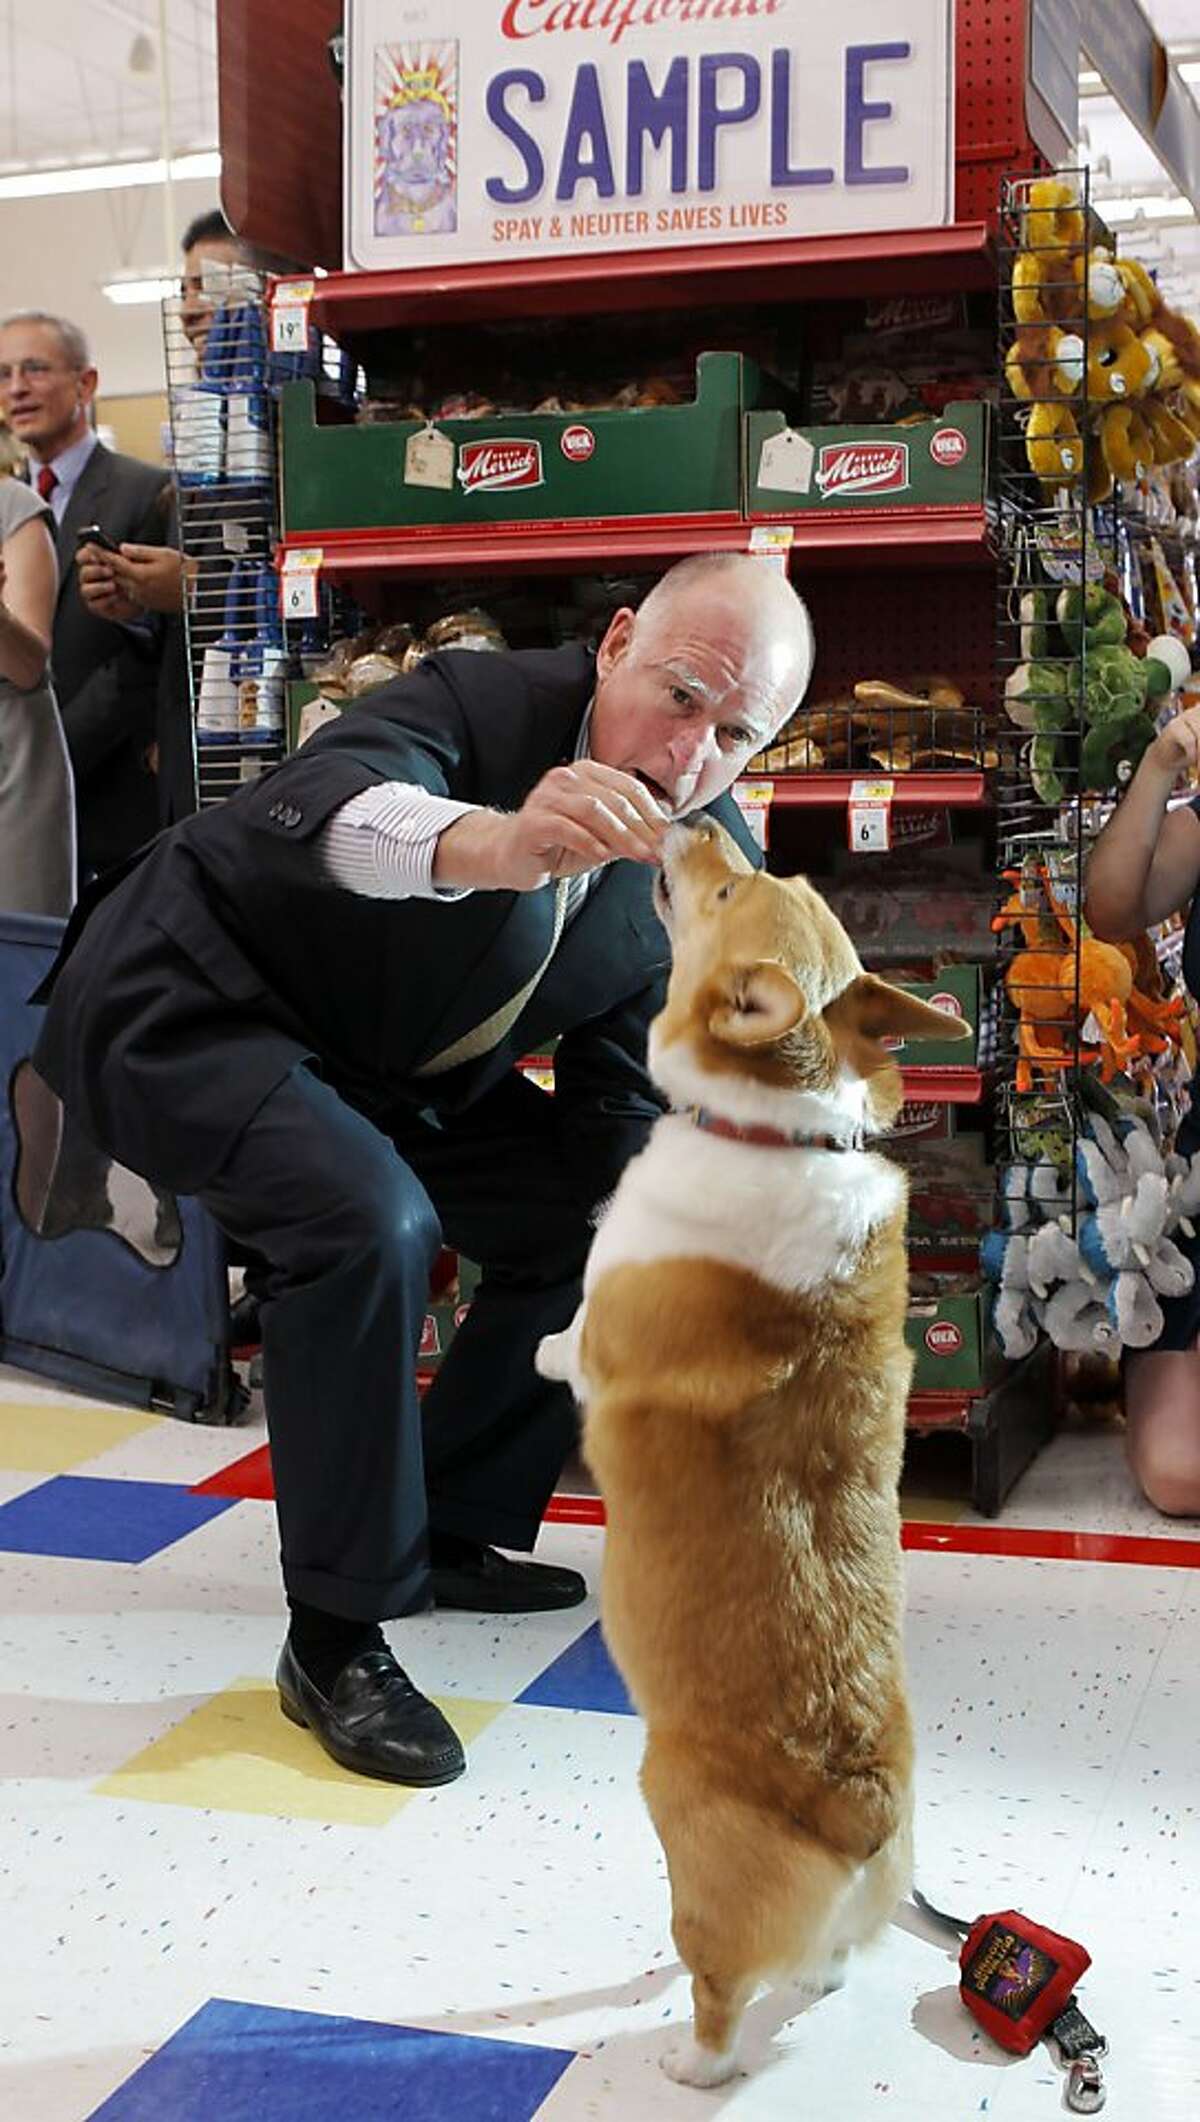 California Gov. Jerry Brown gives his dog, Sutter Brown, food at a Petco store in Los Angeles Wednesday, May 2, 2012. Gov. Brown was promoting sales of speciality license plates that will be used for low-cost spay and neuter programs around the state. Supporters say that will help reduce the pet population and decrease the euthanasia rate (AP Photo/Nick Ut)